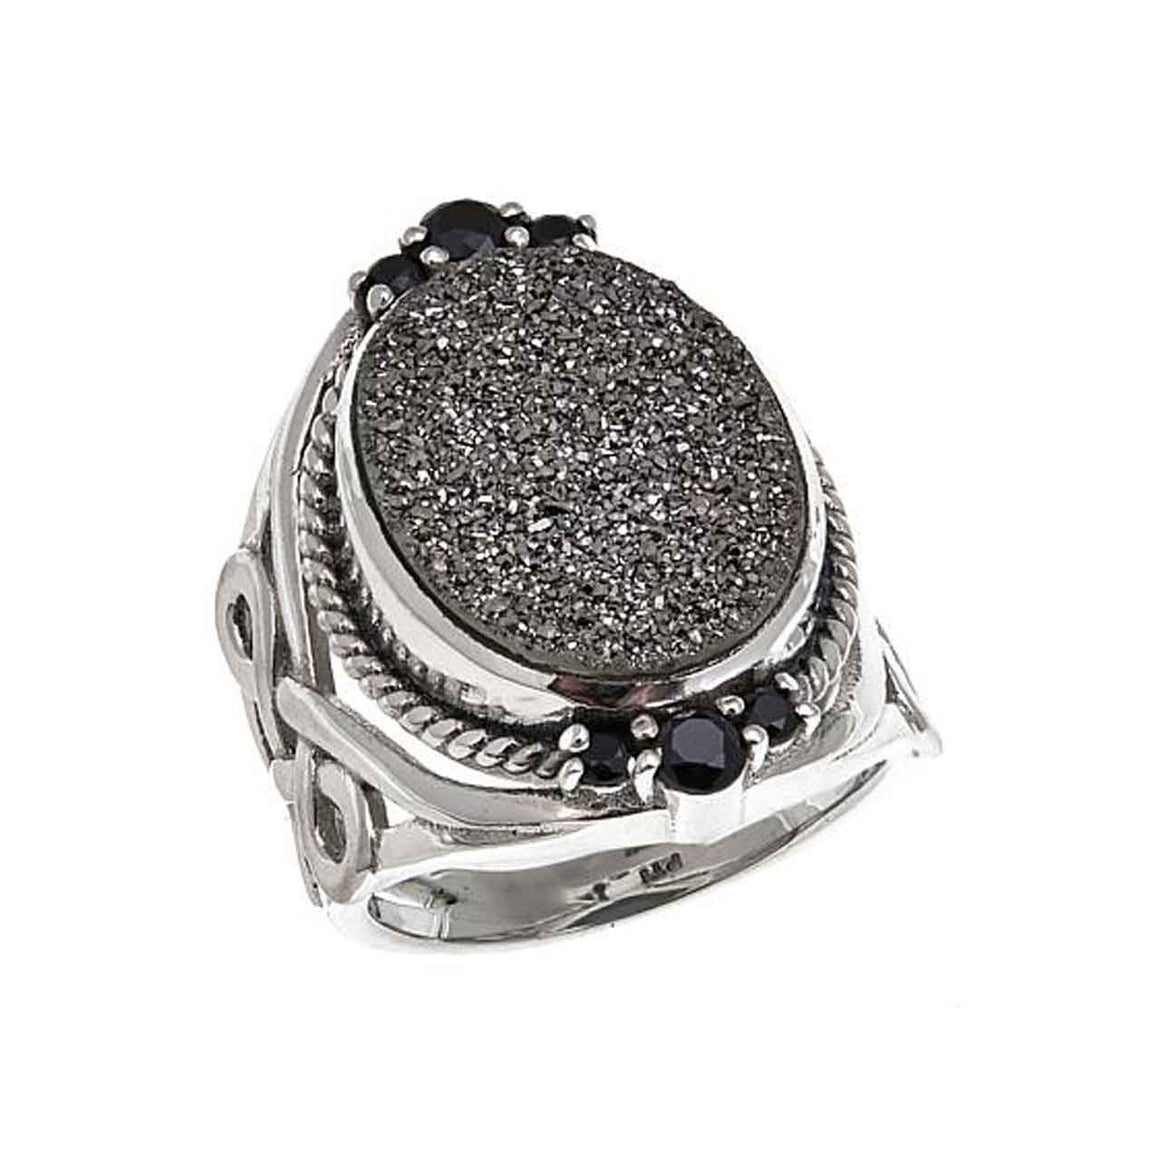 Black Drusy and Black Spinel Ring